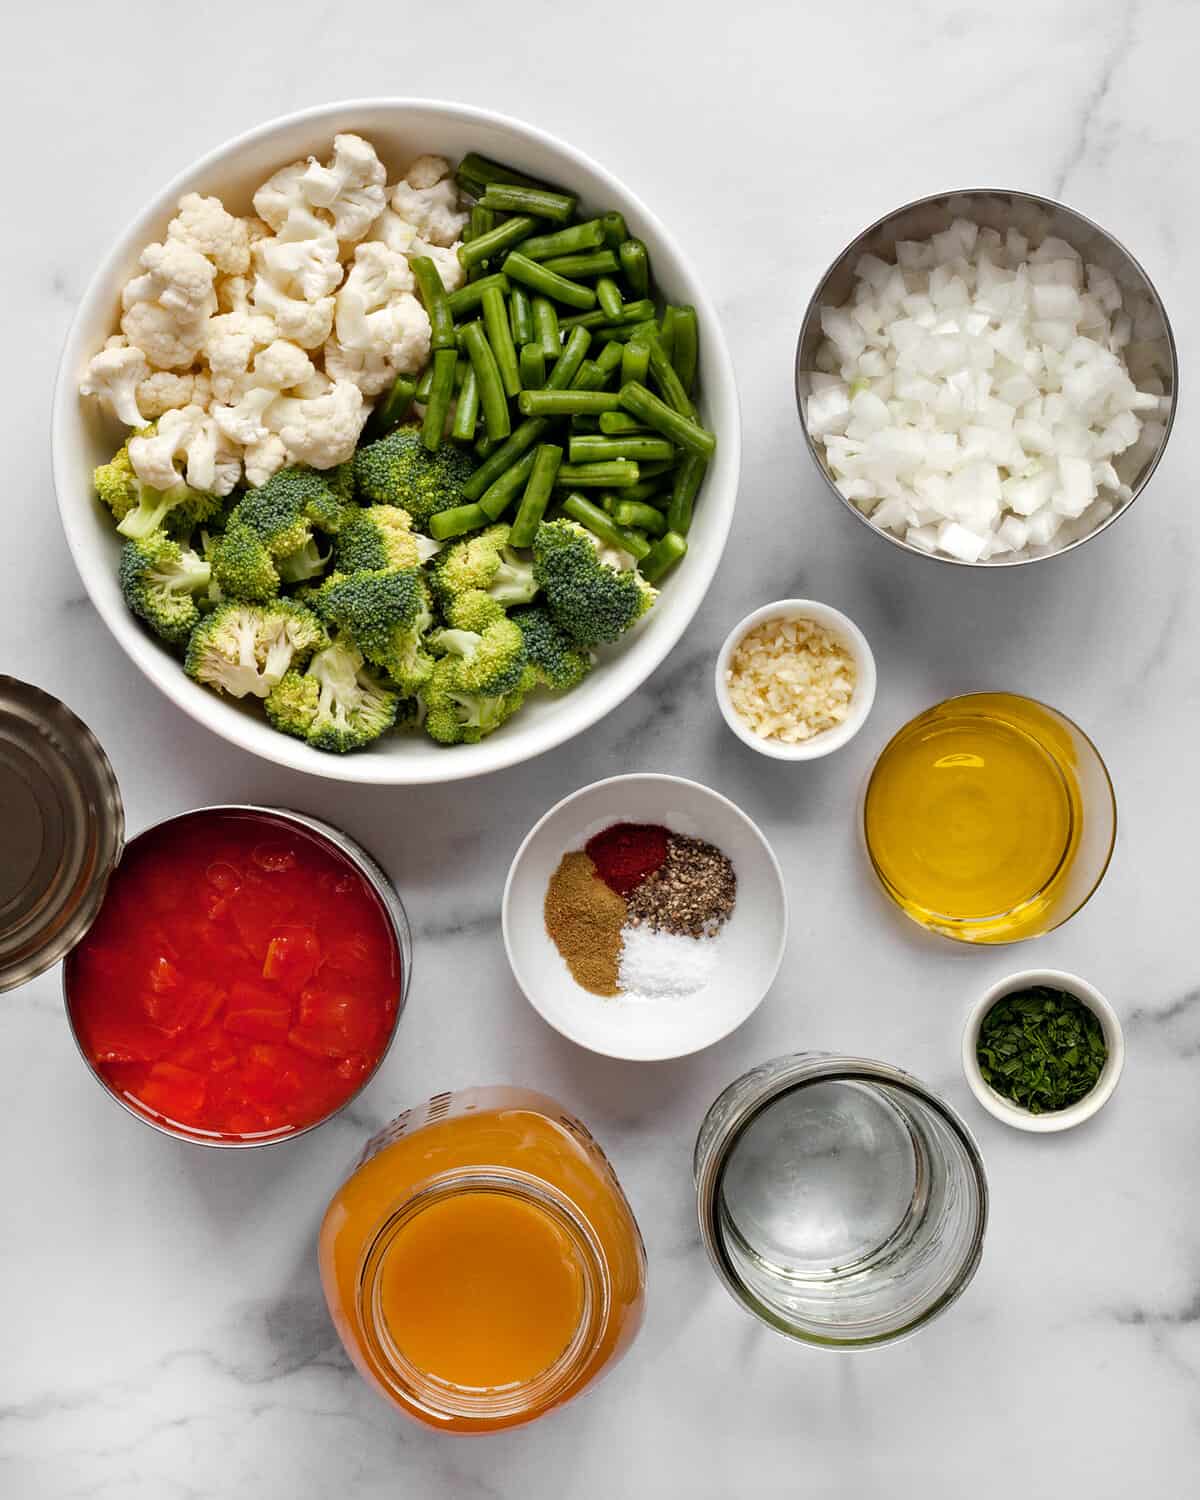 Ingredients including broccoli, cauliflower, green beans, canned tomatoes, onions, garlic, spices, olive oil and broth.